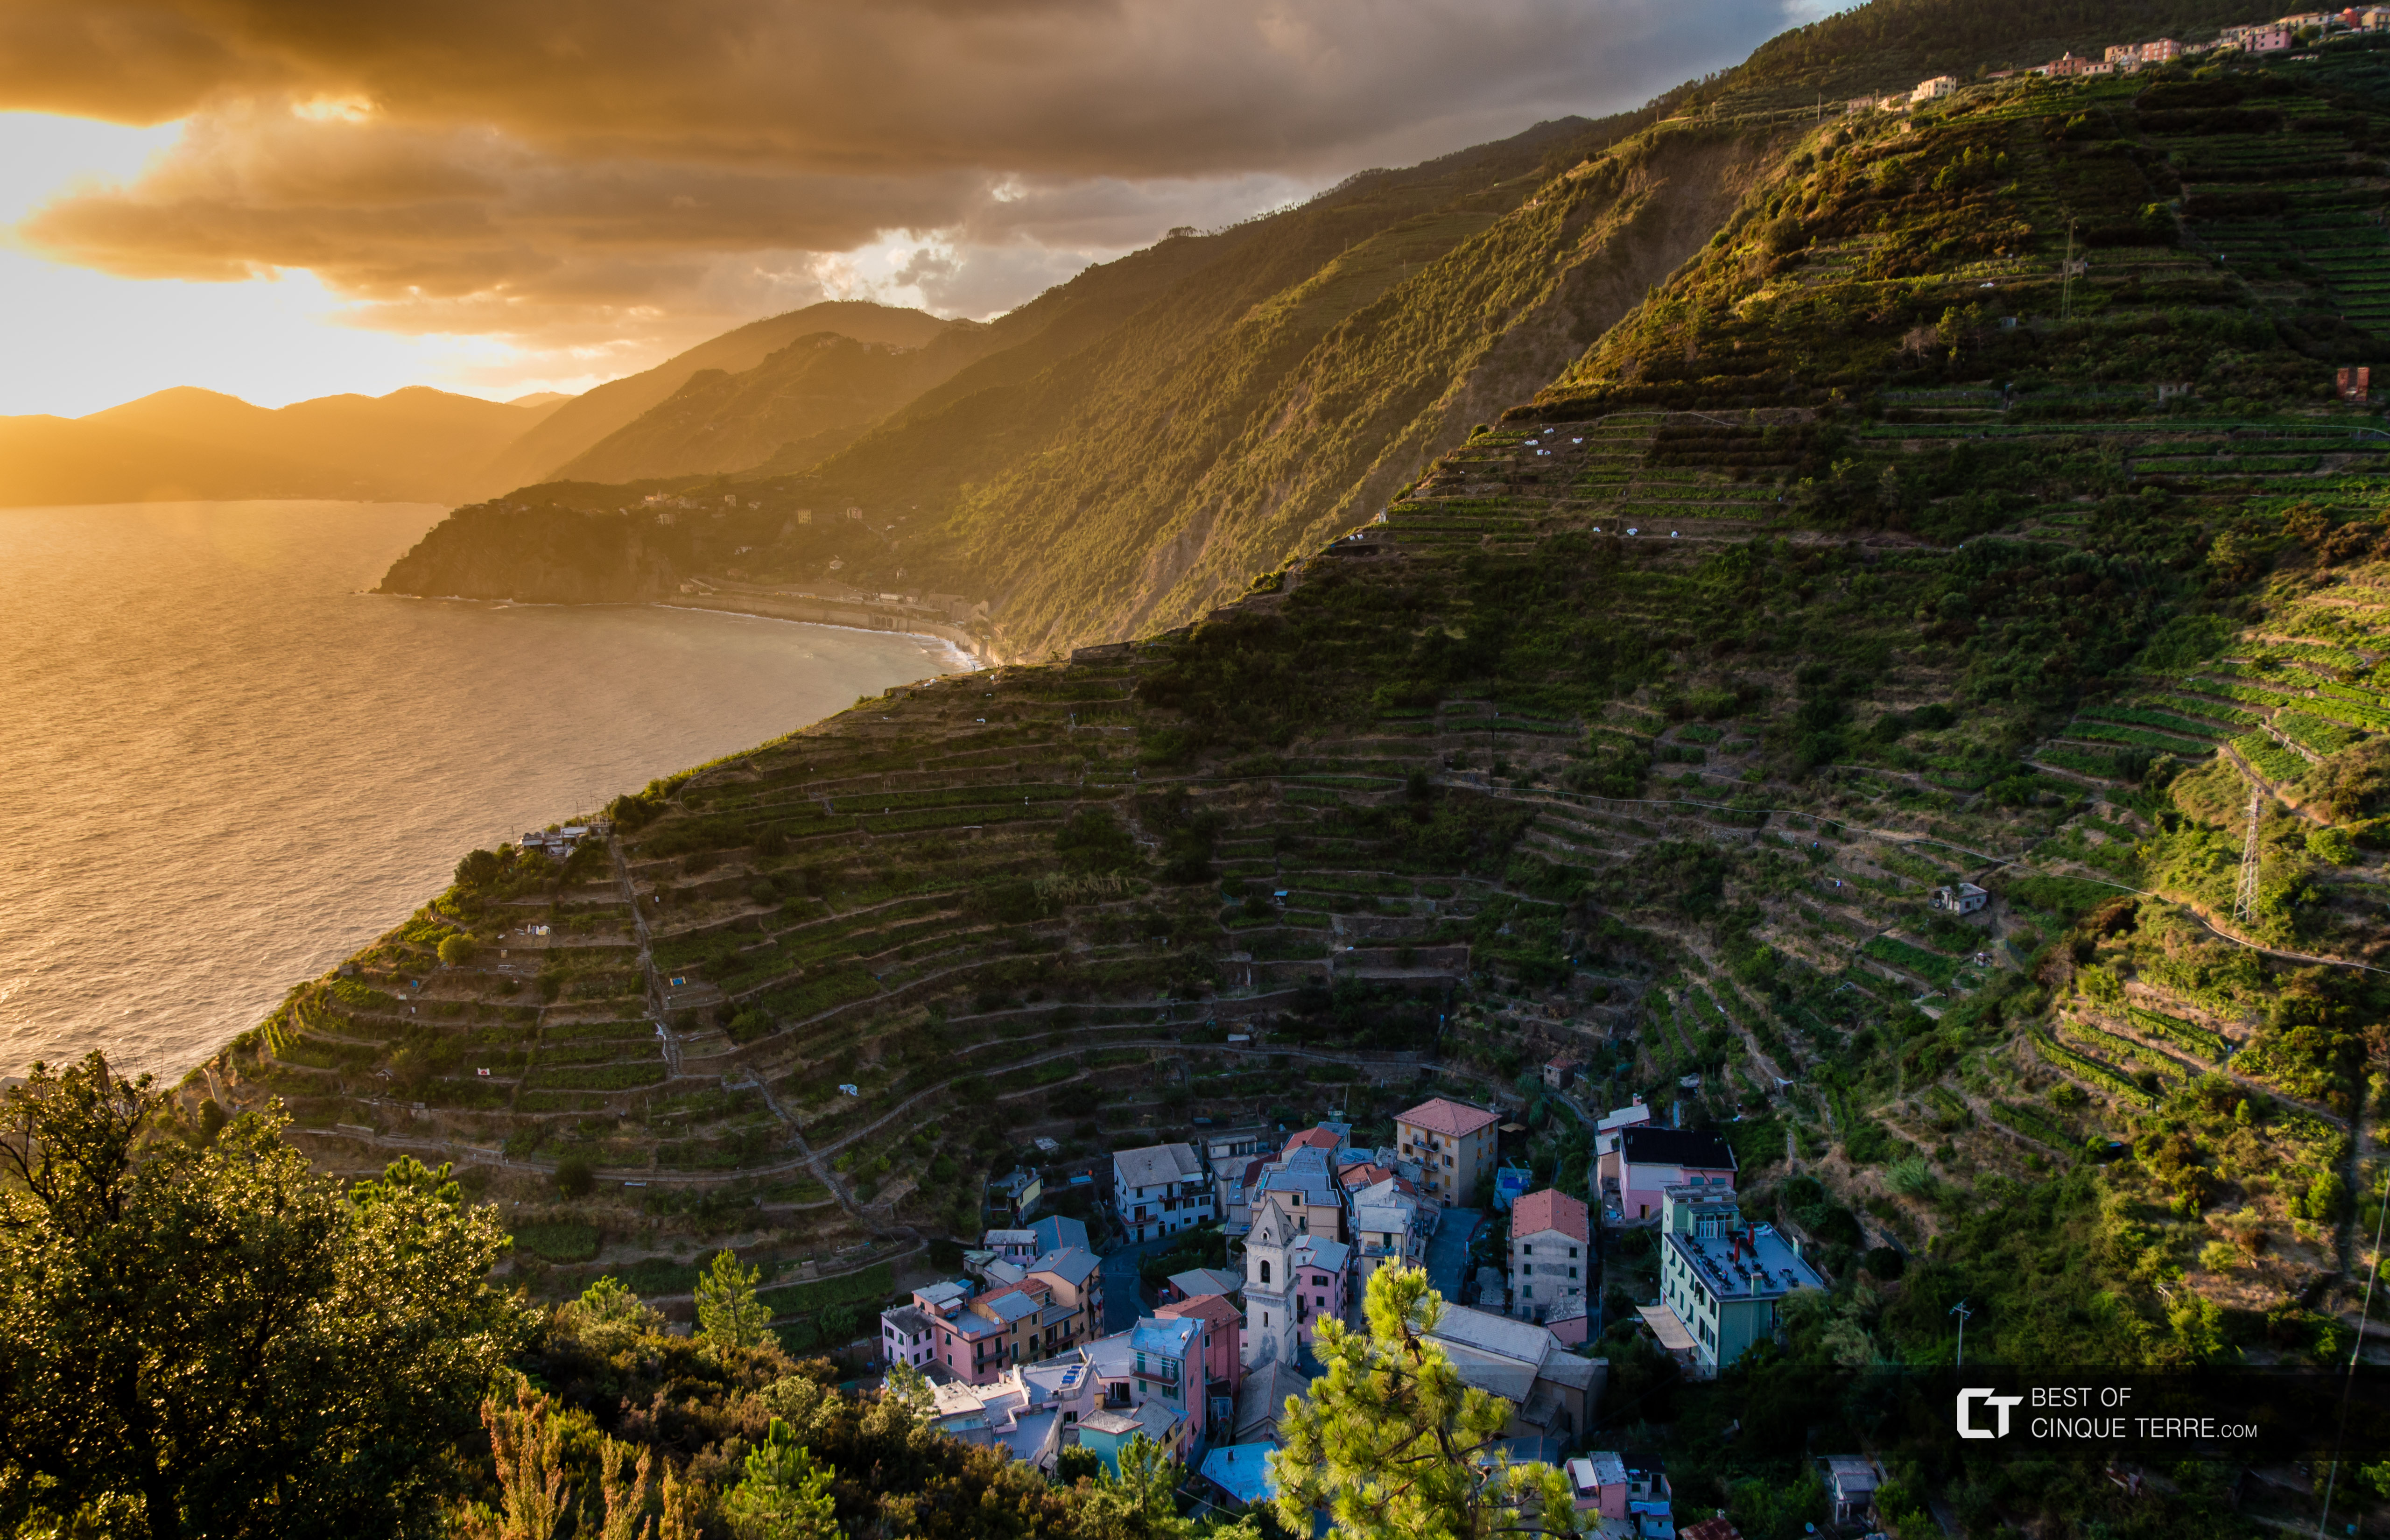 View of the village from the Beccara trail, Manarola, Cinque Terre, Italy